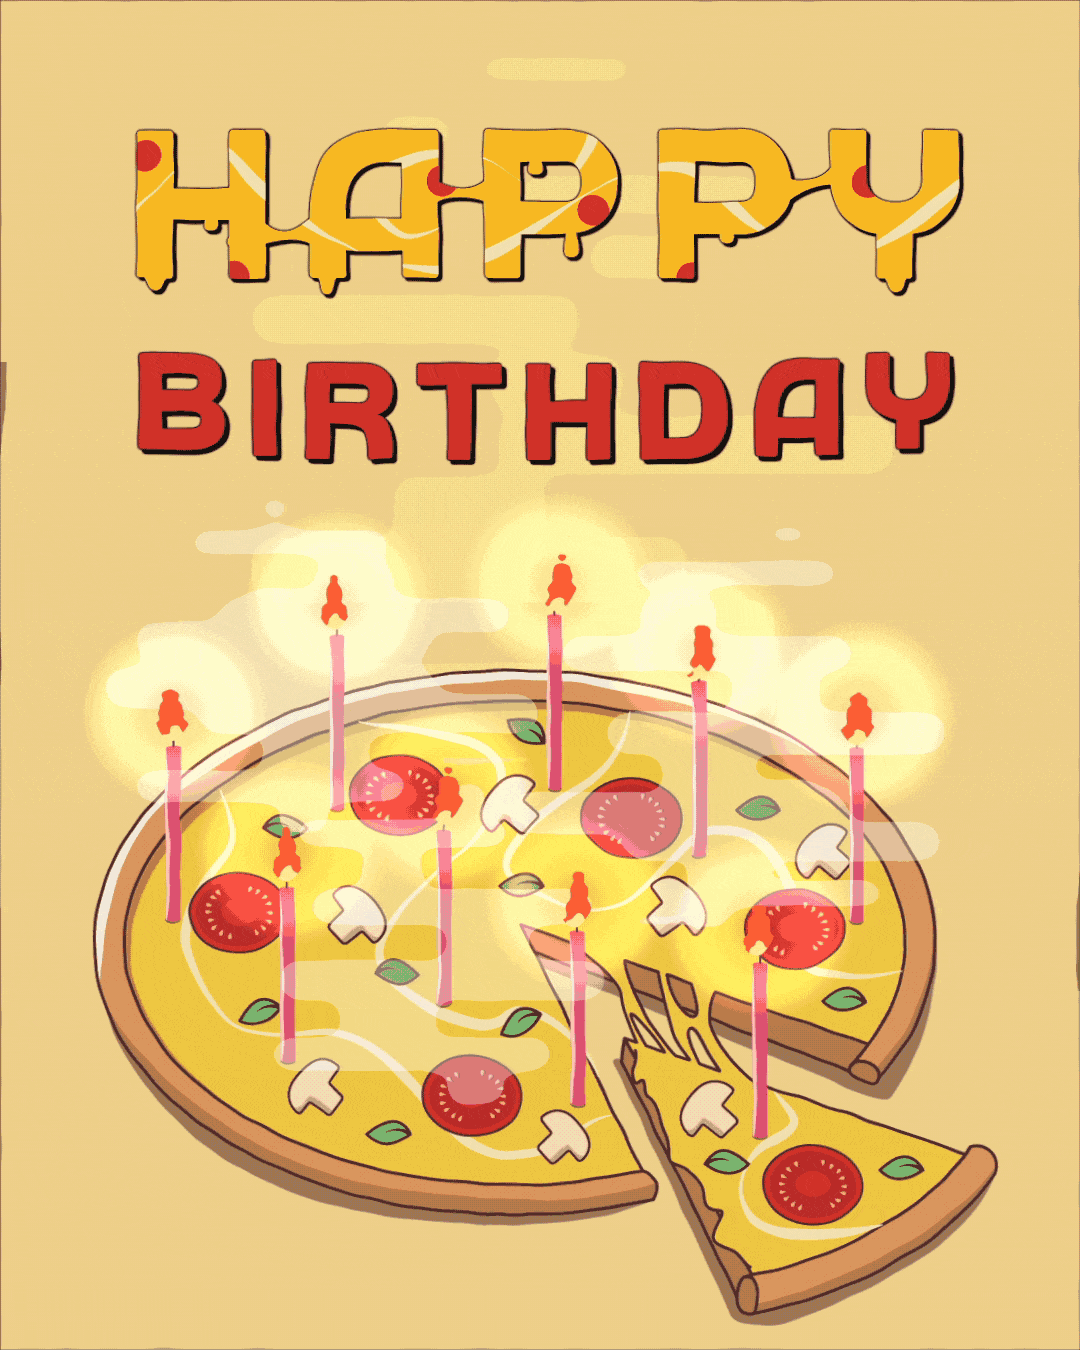 Birthday Pizza with Candles Animated Images and GIFs | Birthdayyou.com